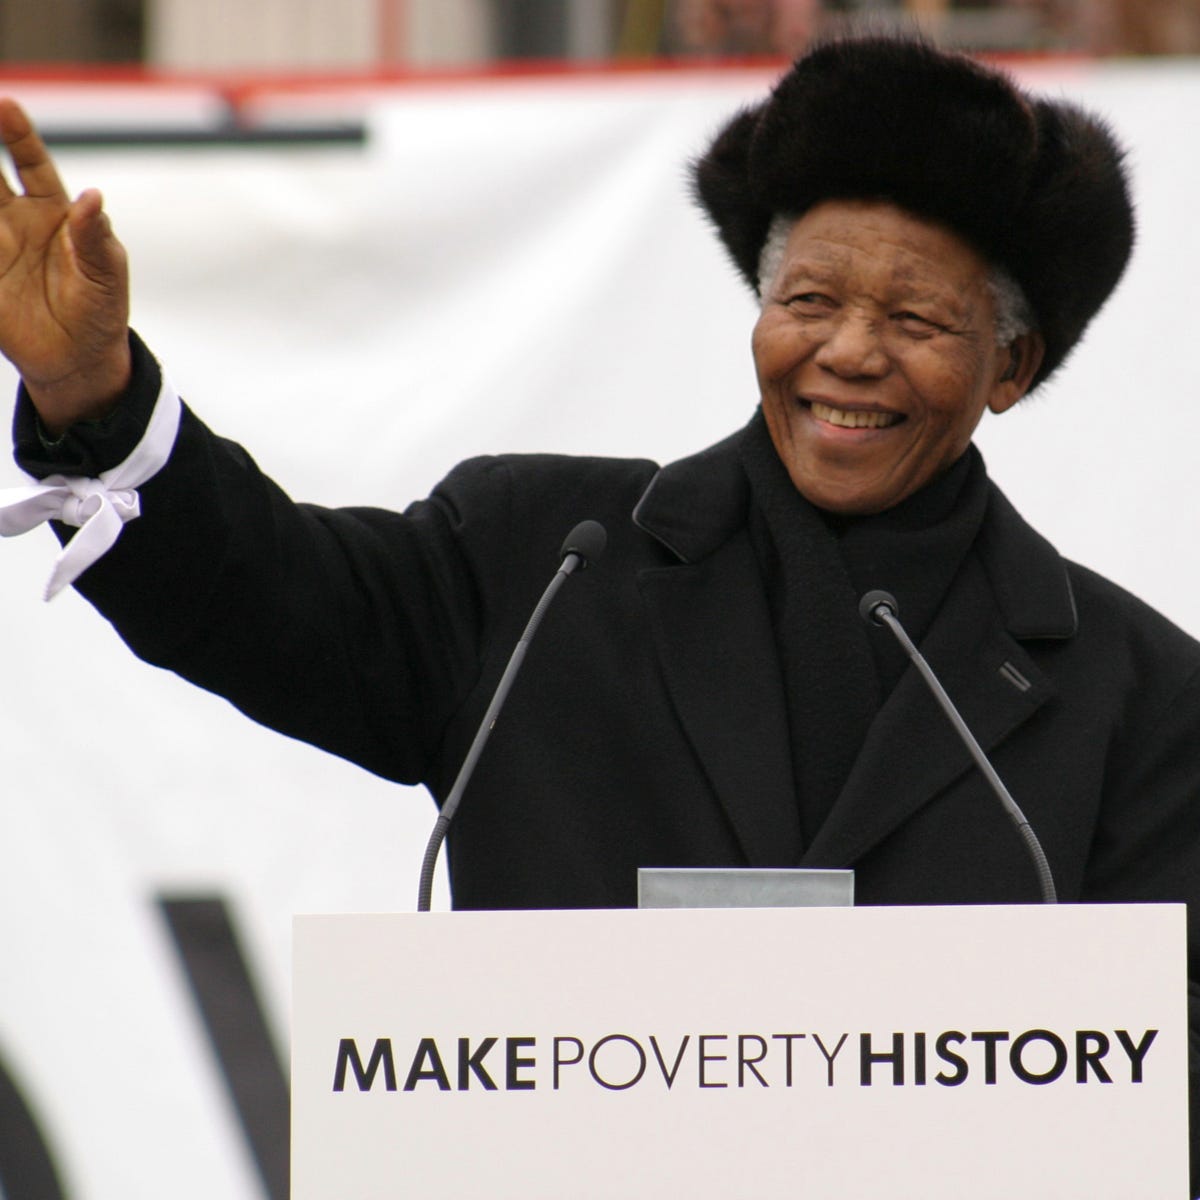 8 powerful quotes from Mandela's 'Make Poverty History' speech - ONE